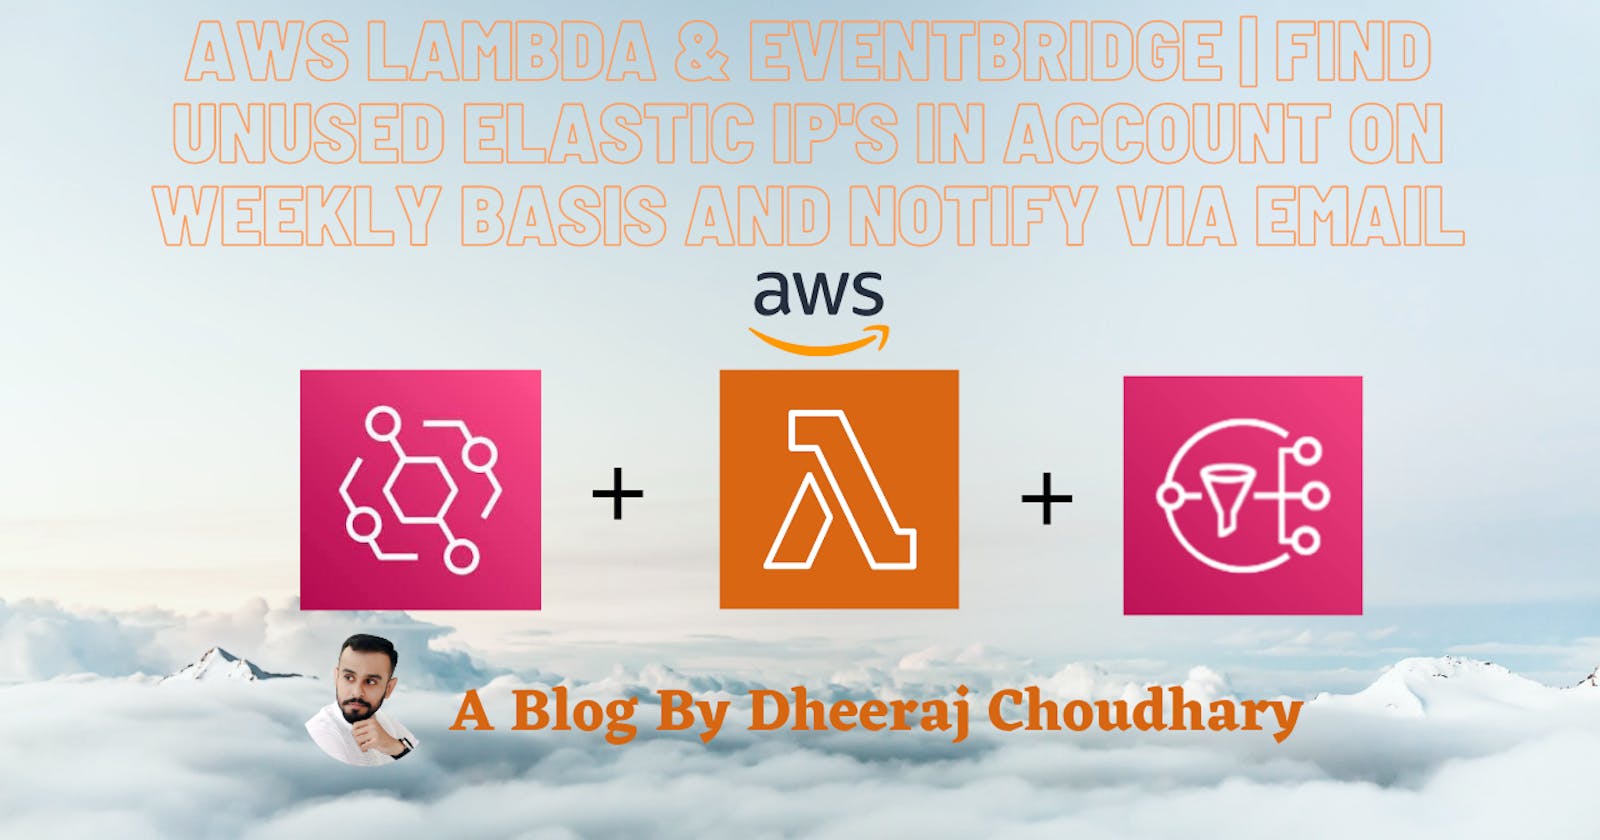 AWS Lambda & EventBridge | Find Unused AWS Elastic IP's In AWS Account On Weekly Basis And Notify Via Email